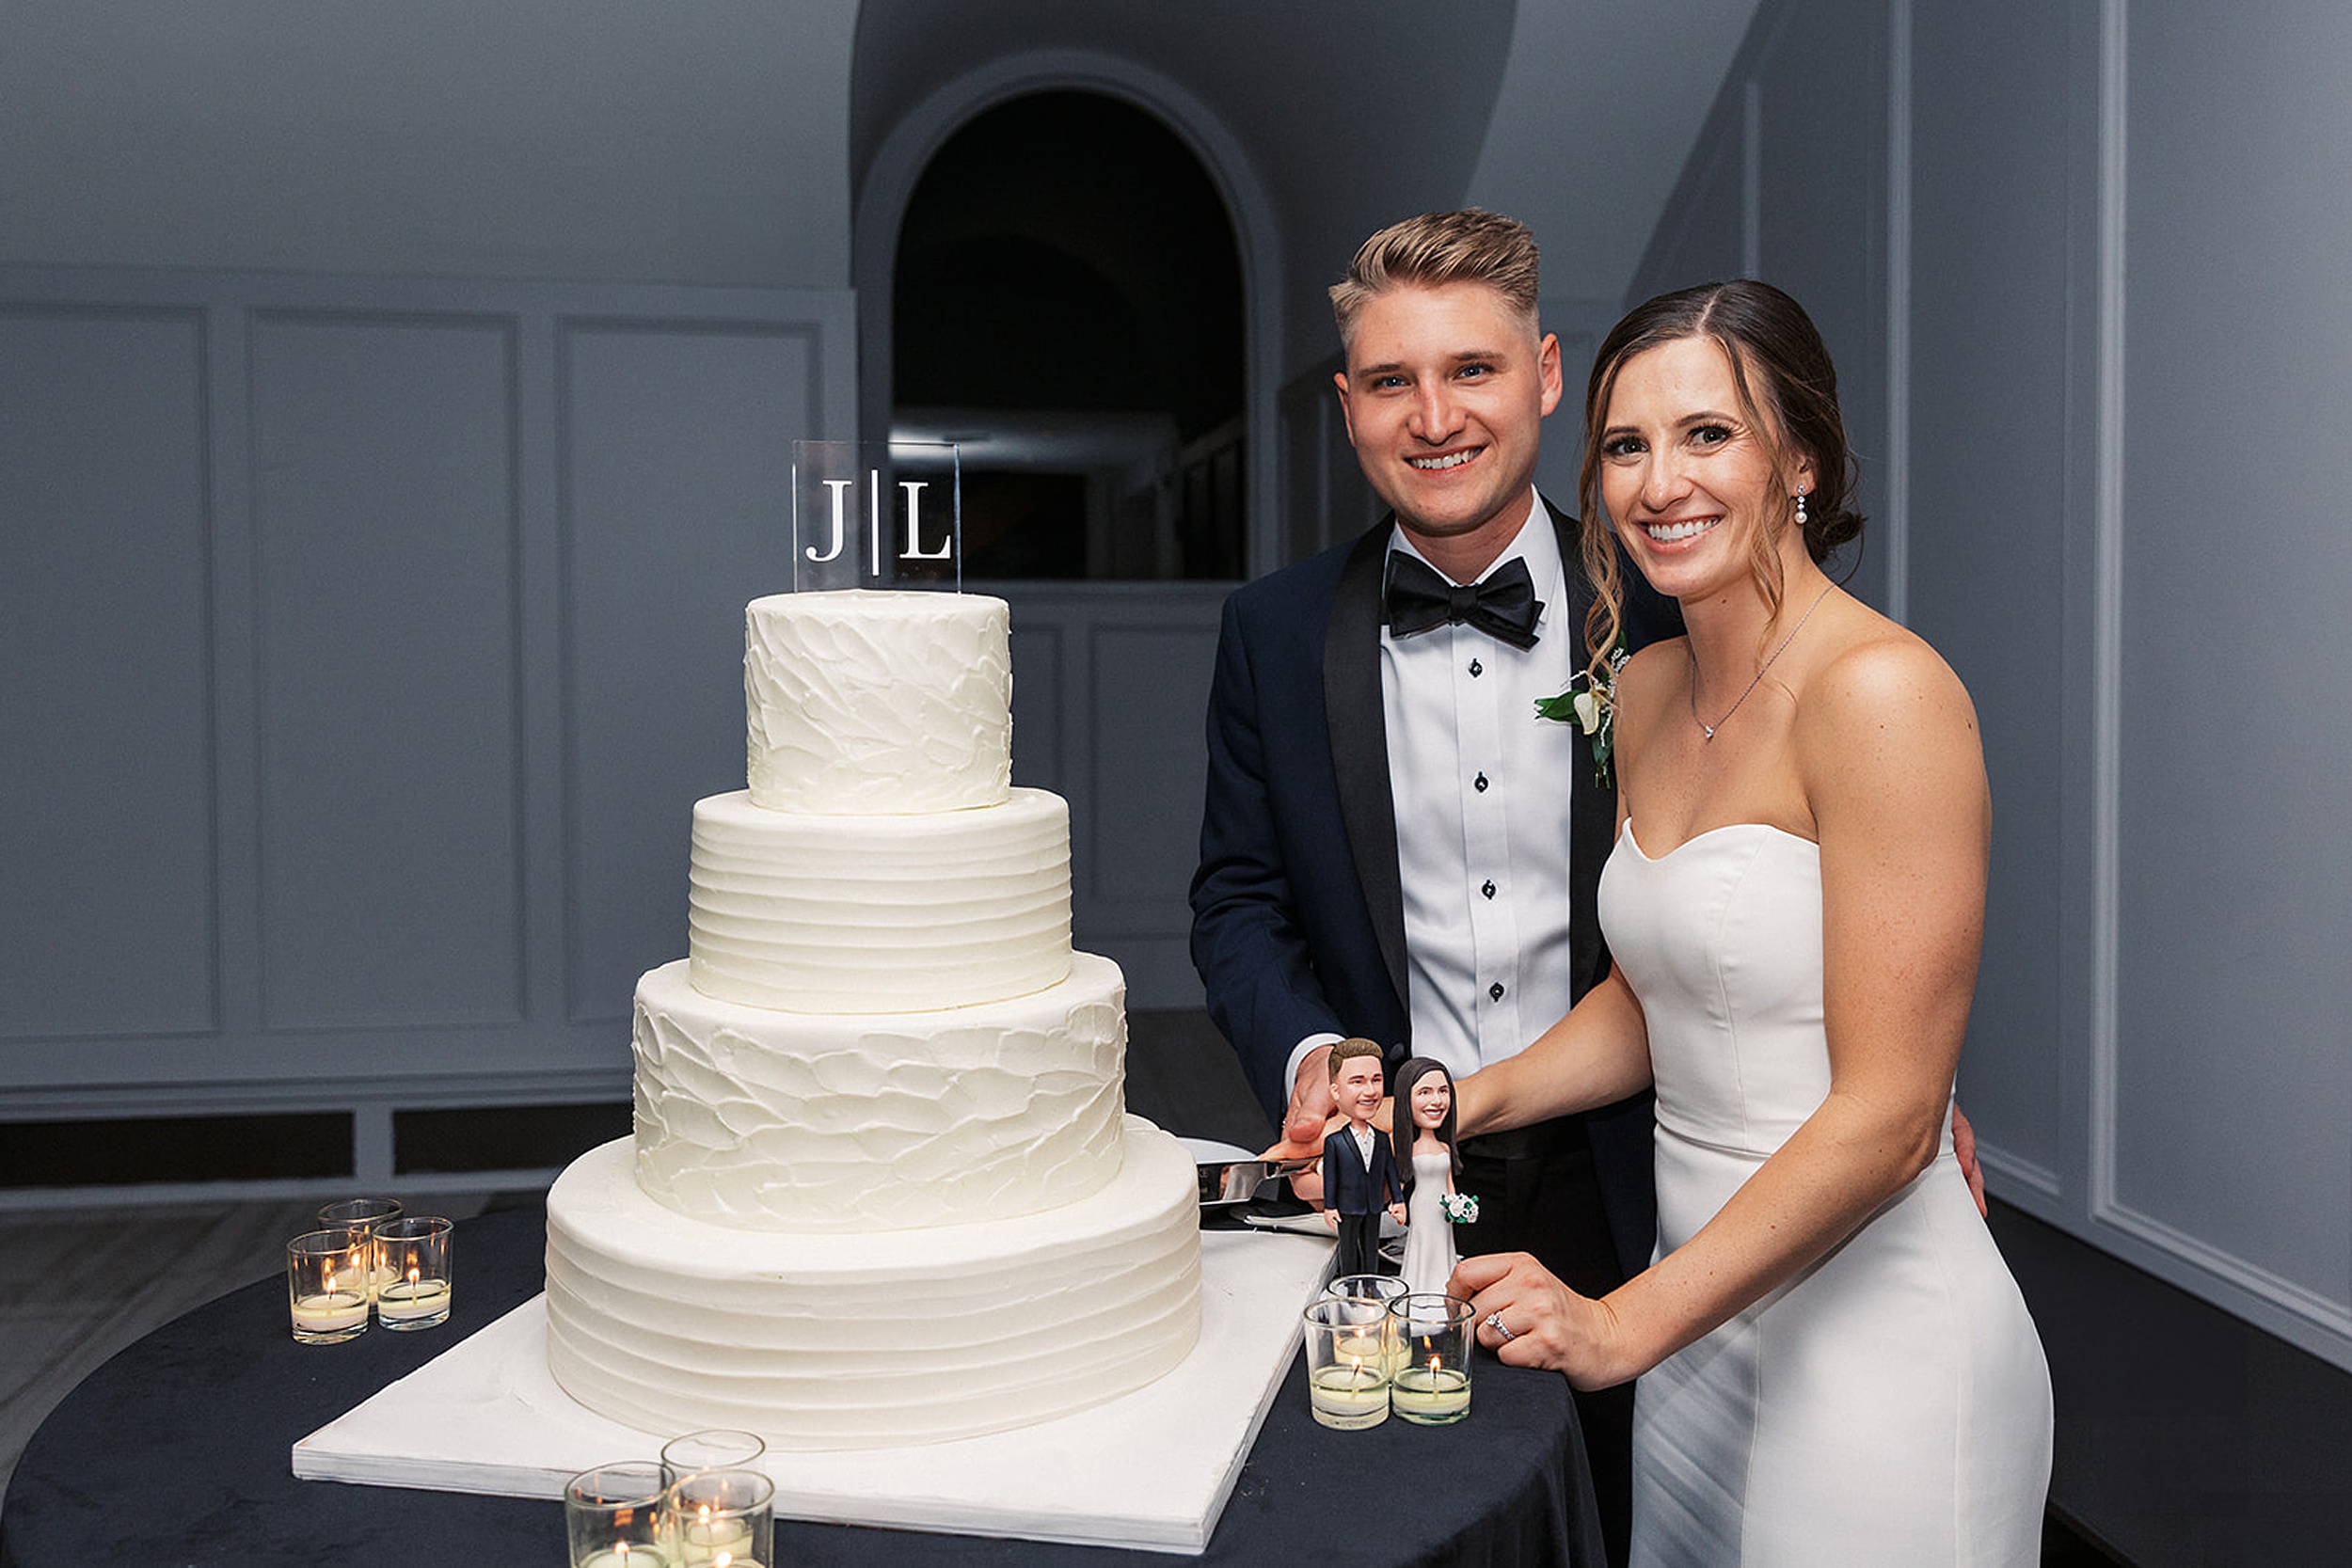 Newlyweds stand together as they cut their four tier white cake and hold the knife together